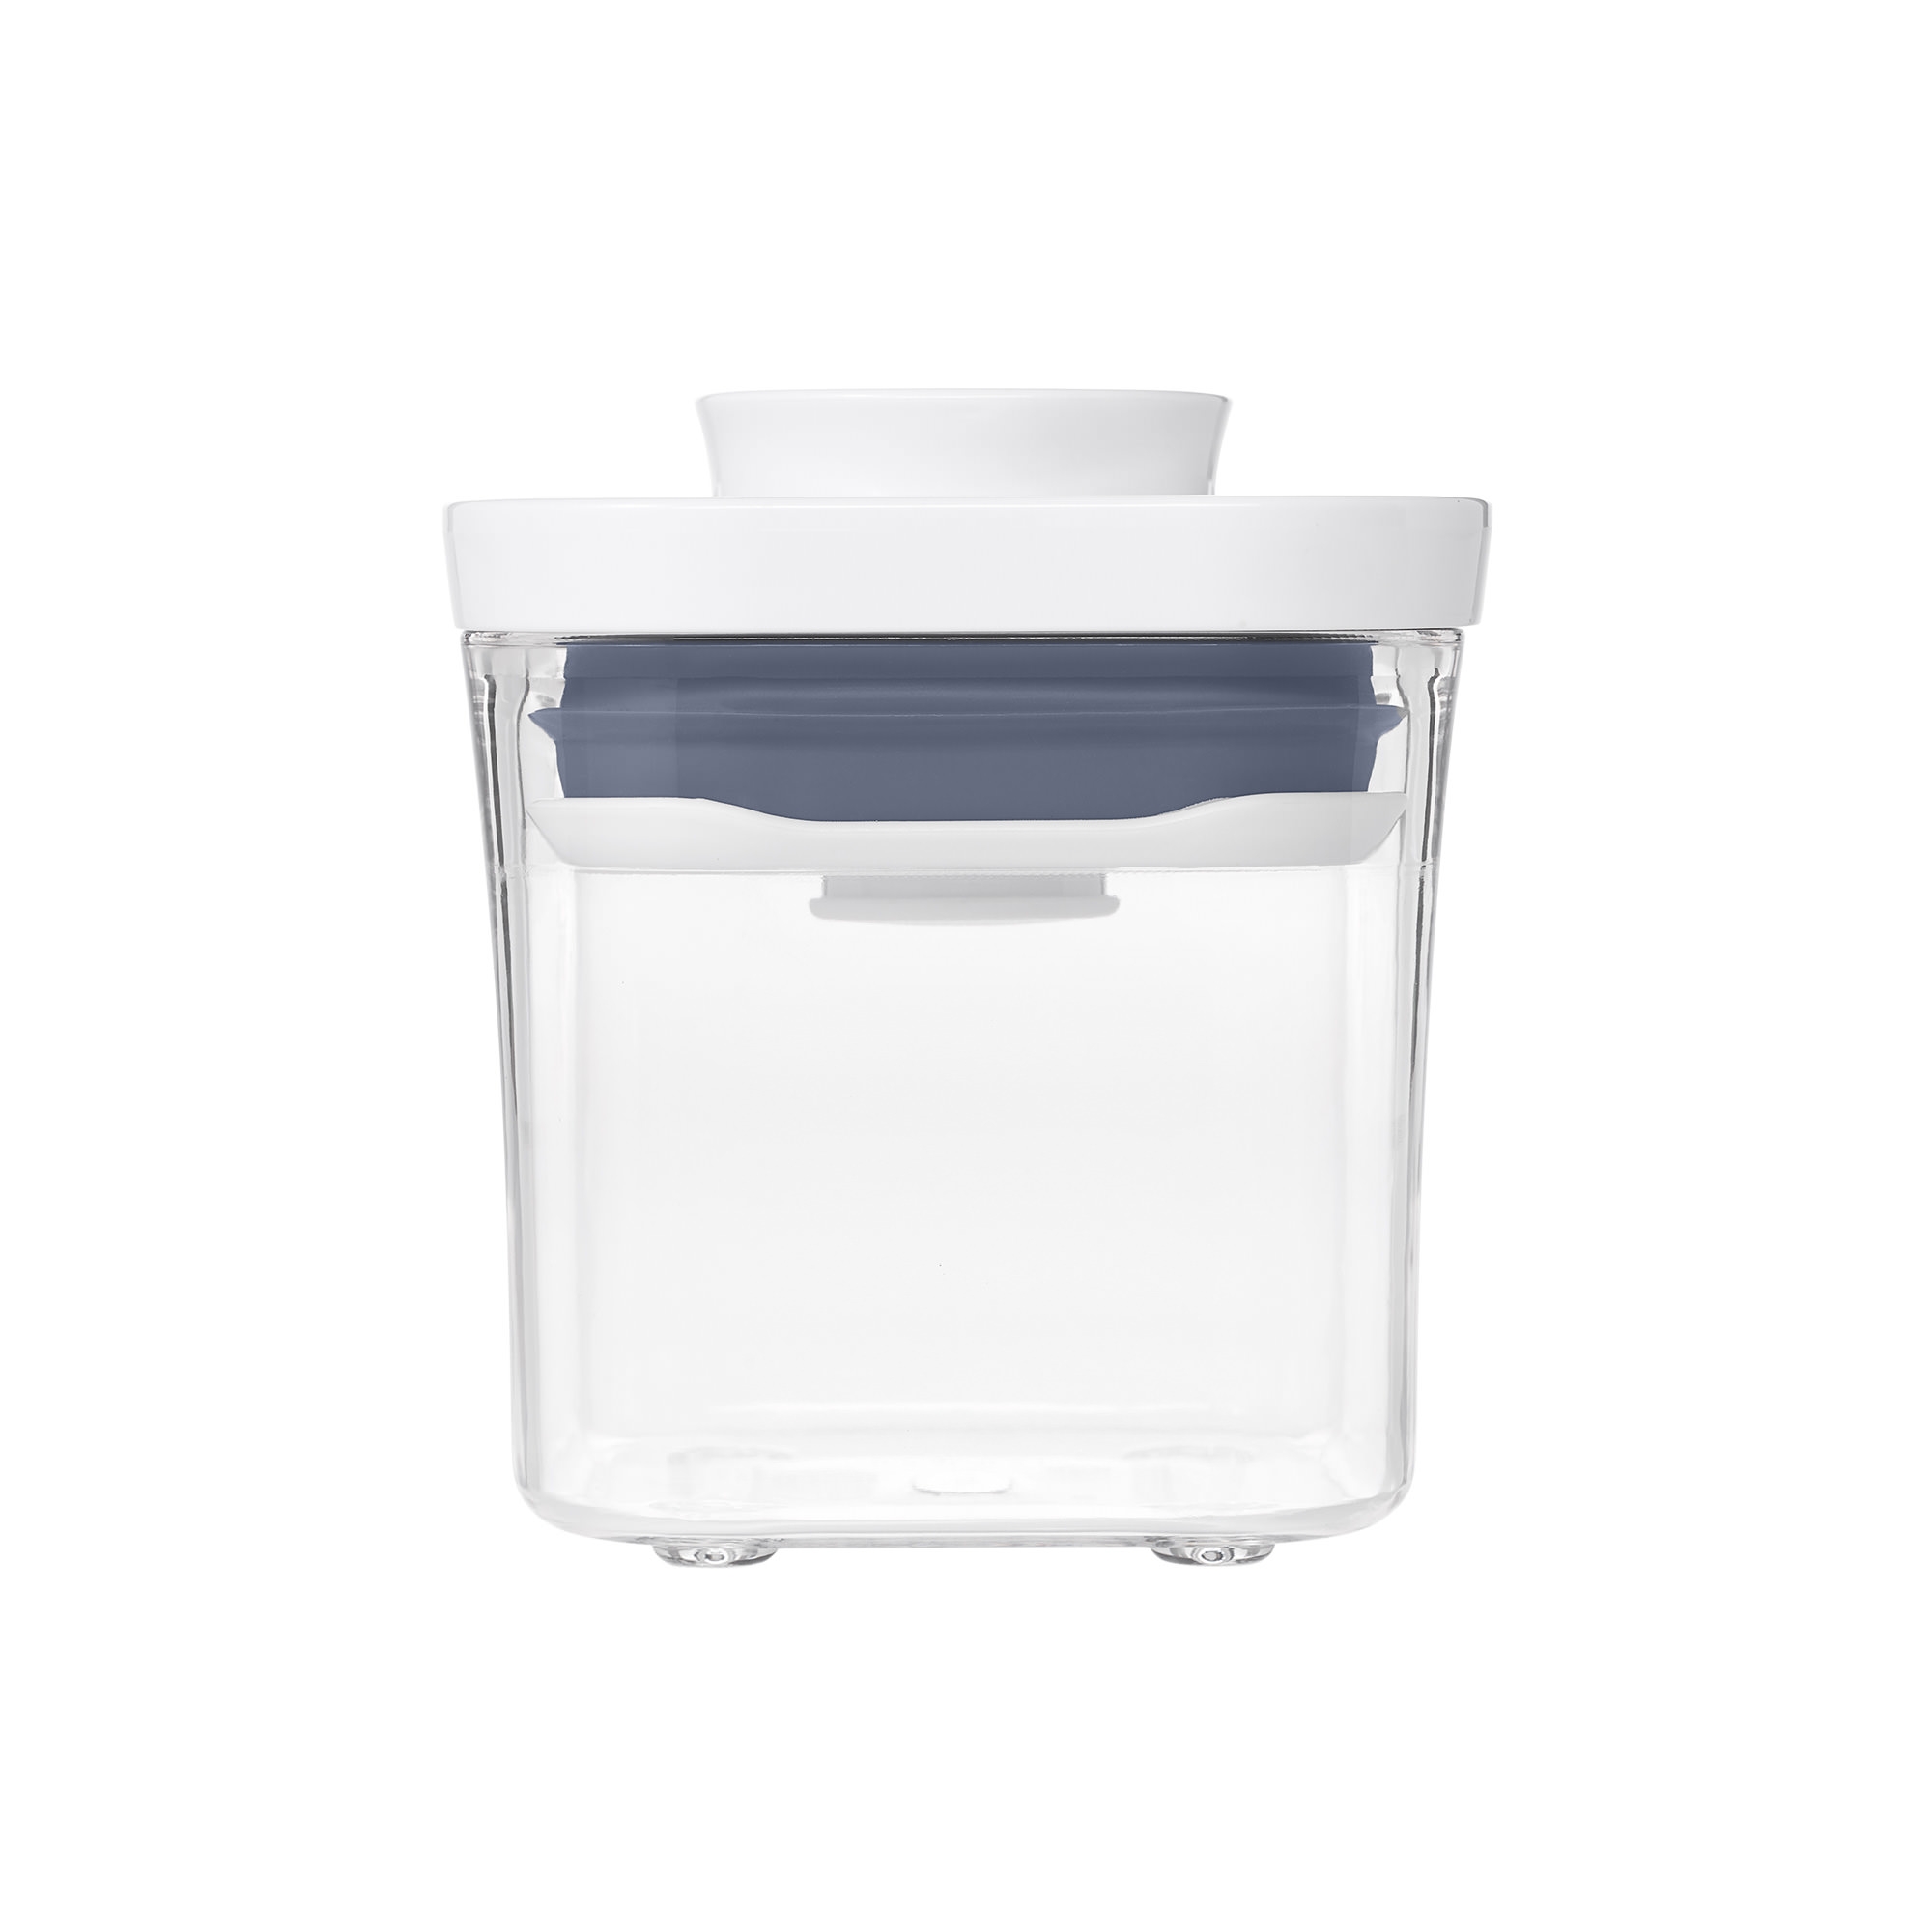 OXO Good Grips Square Pop 2.0 Container 200ml Image 1